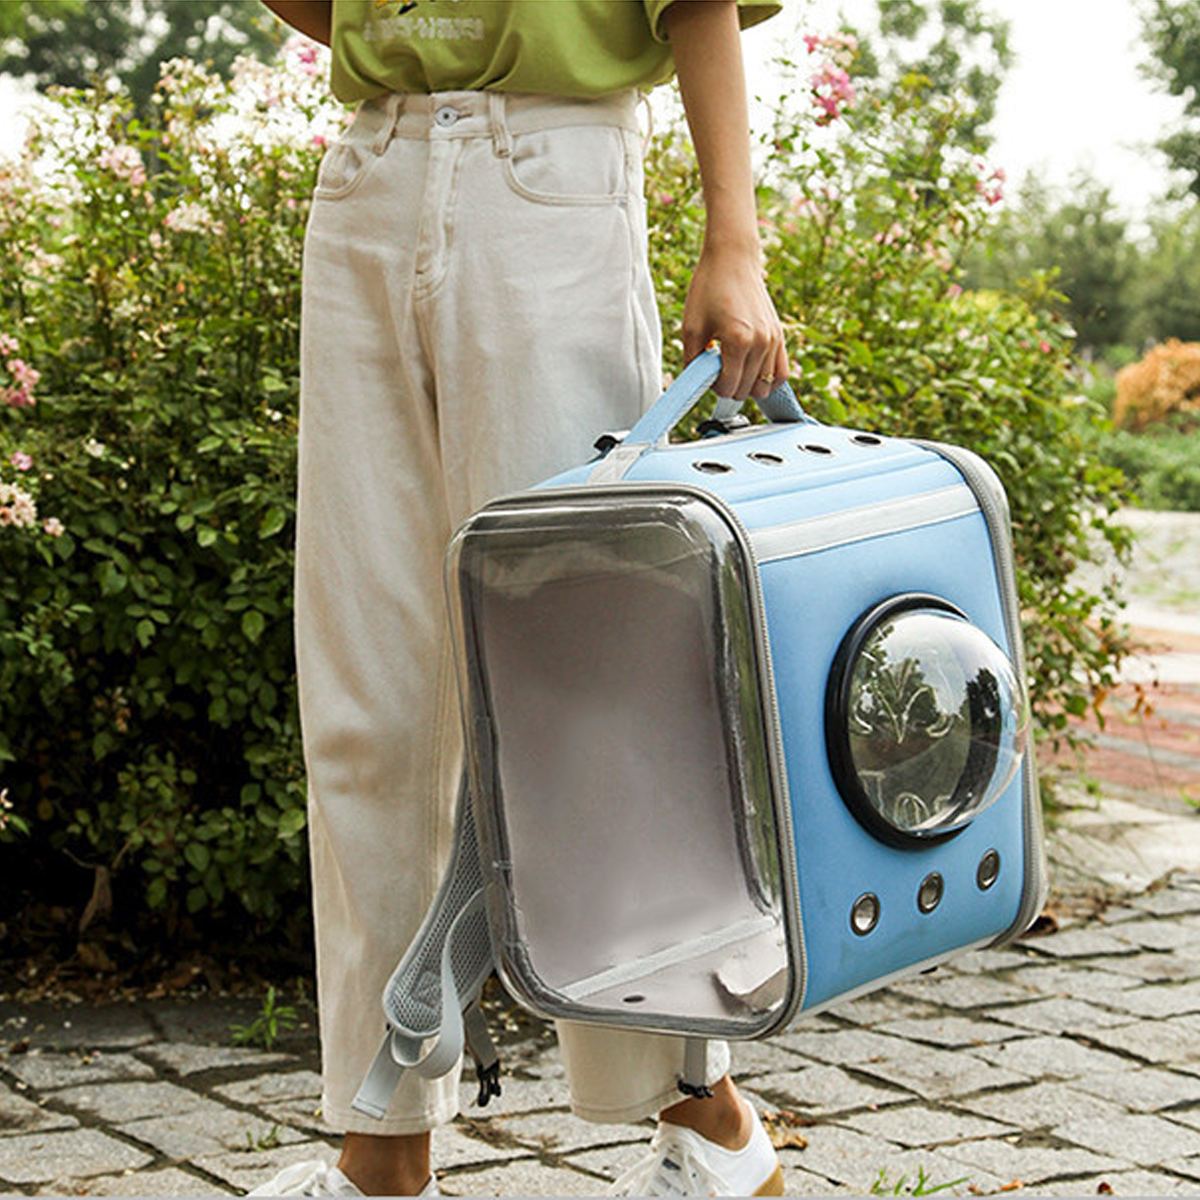 Pet-Carrier-Bag-Breathable-Astronaut-Space-Backpack-Puppy-Cat-Cage-Transport-Bag-Capsule-Space-1756971-11